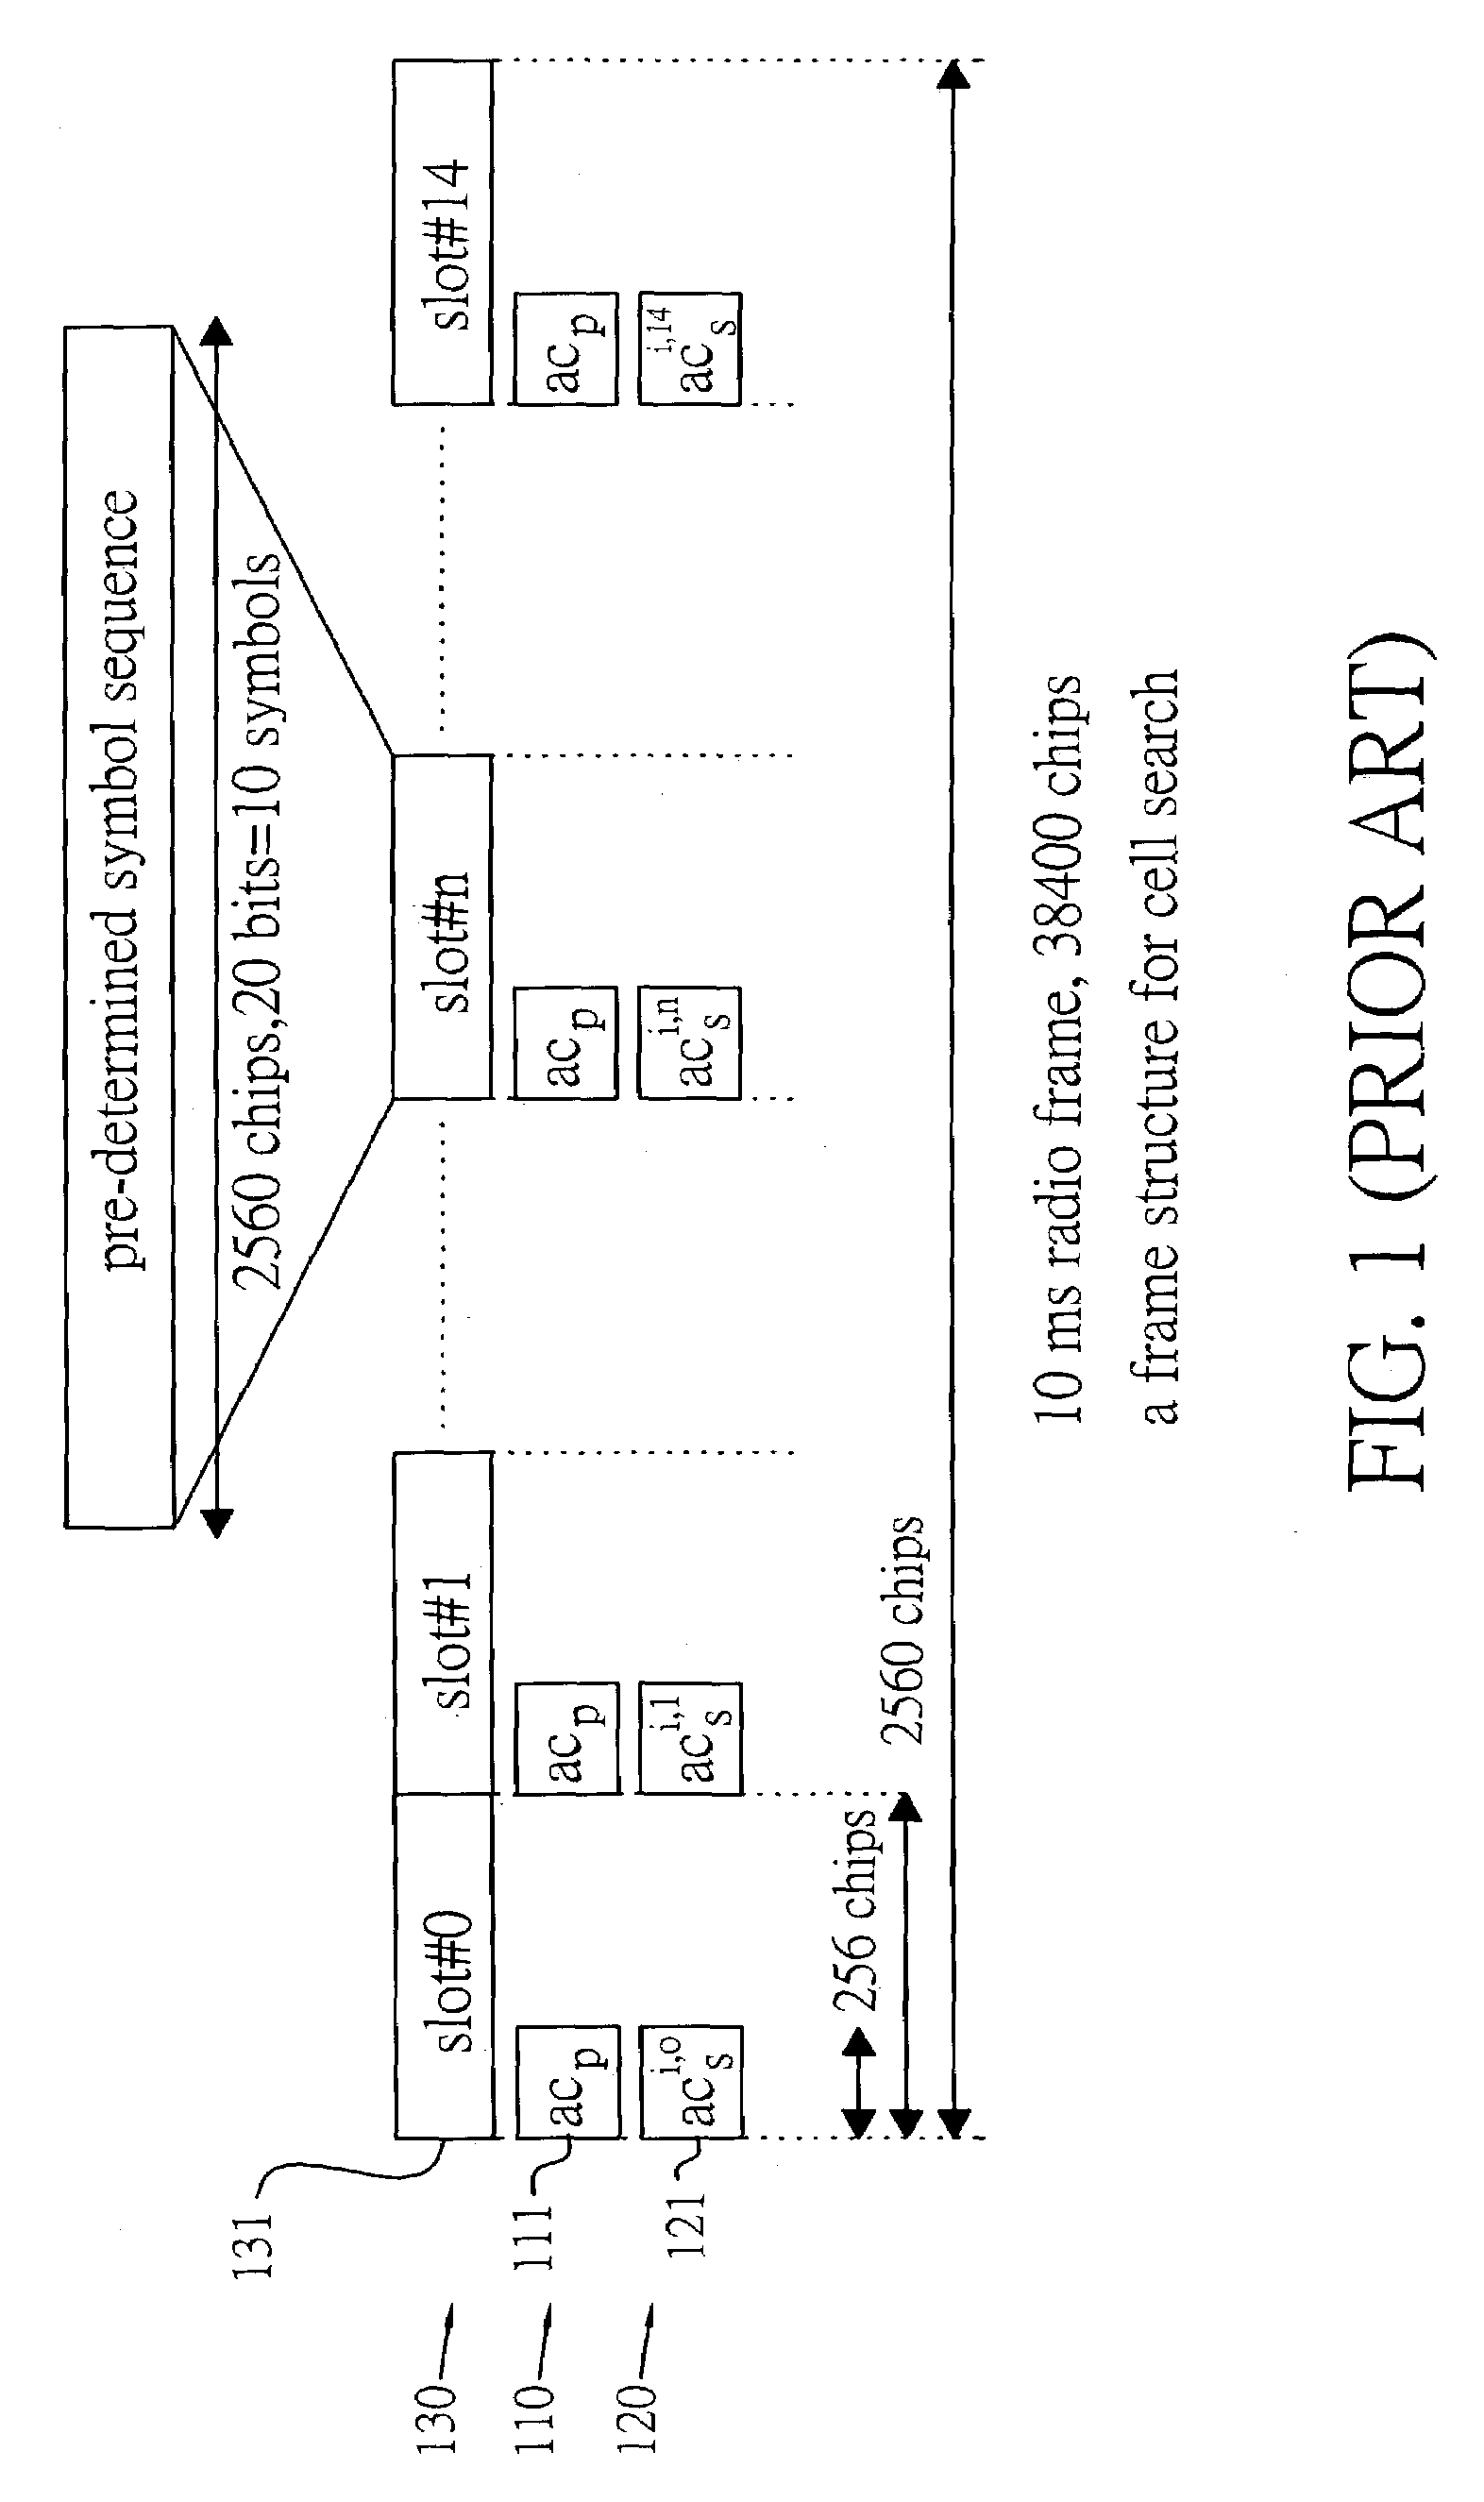 Synchronization code detecting apparatus for cell search in a CDMA system